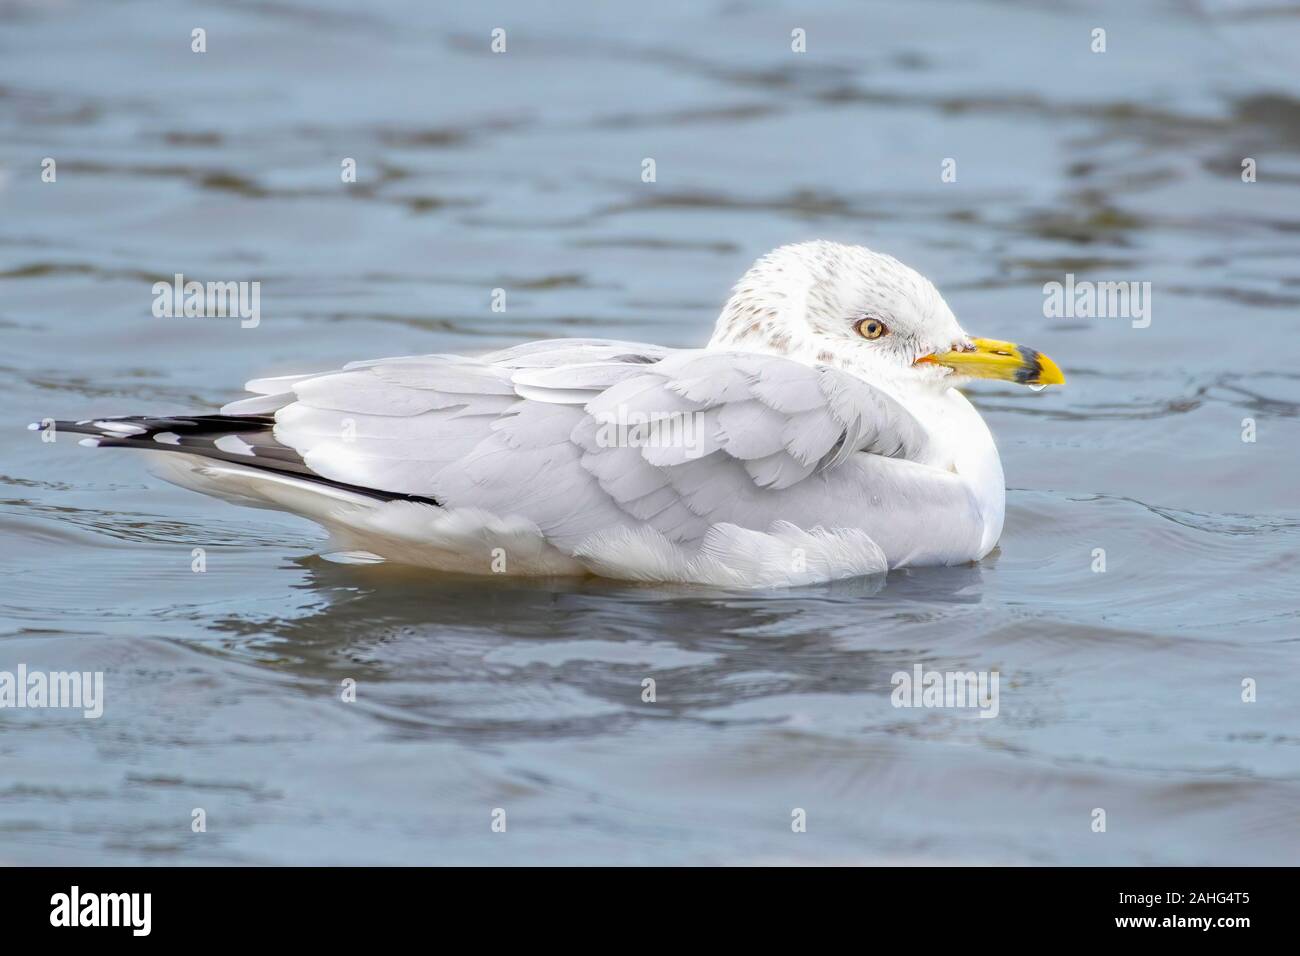 Black ring billed gull floating in the water in the Gulf of Mexico Florida Stock Photo